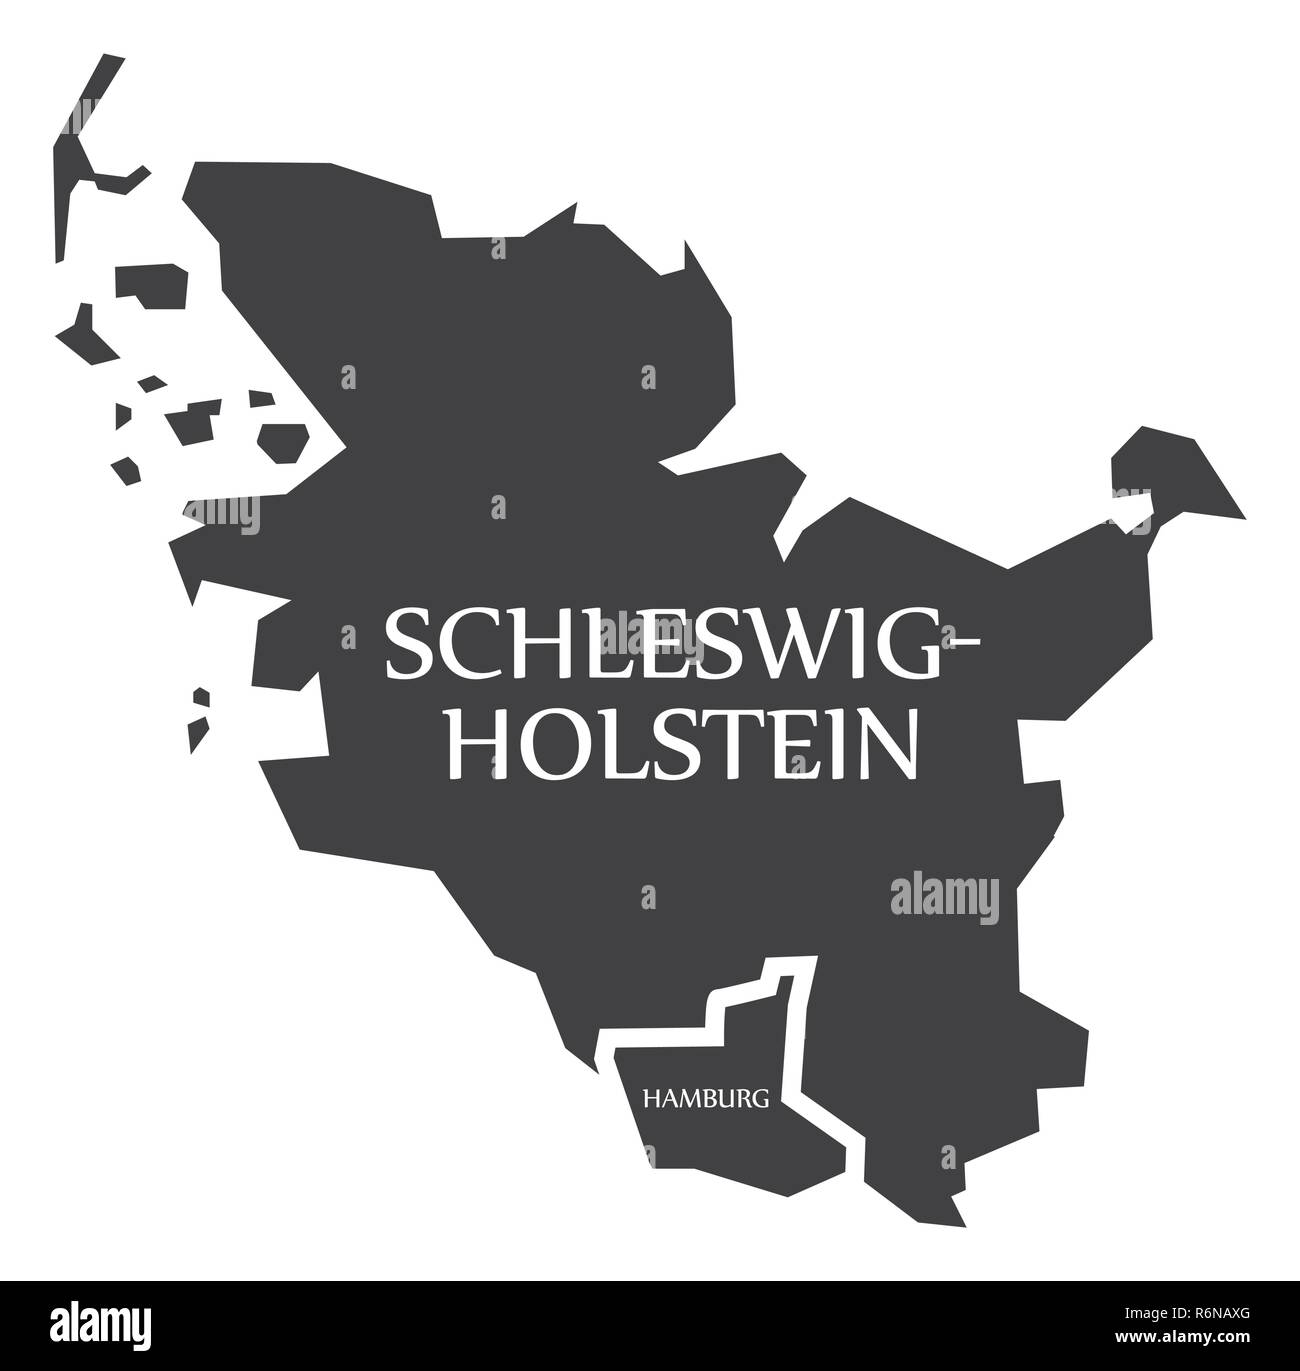 Schleswig Holstein - Hamburg federal states map of Germany black with titles Stock Vector